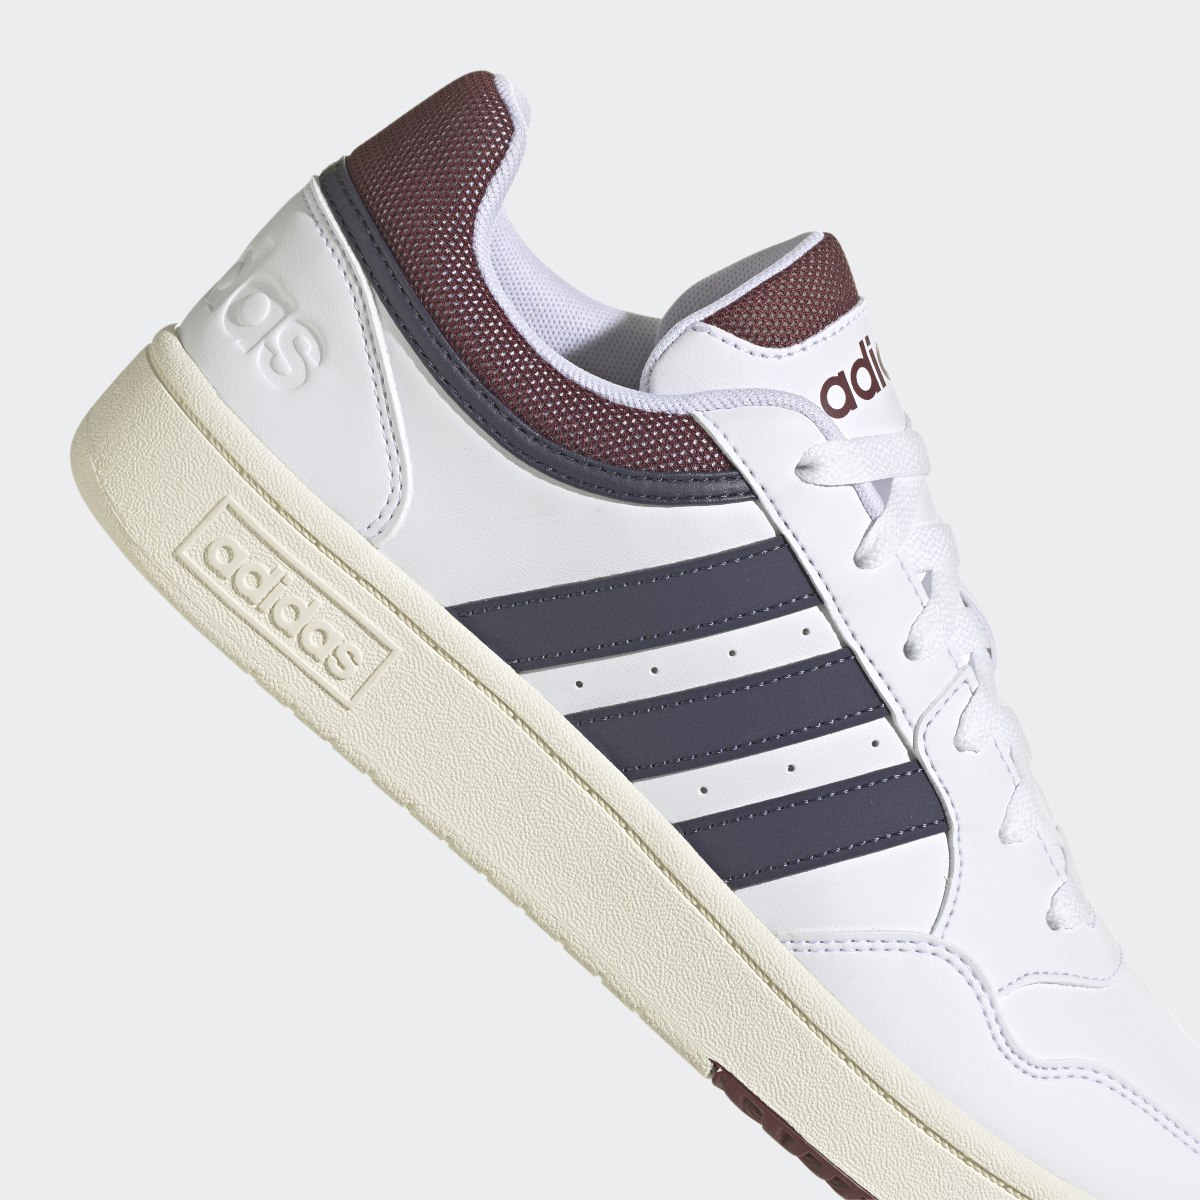 Adidas Hoops 3.0 Low Classic Vintage Shoes. 10